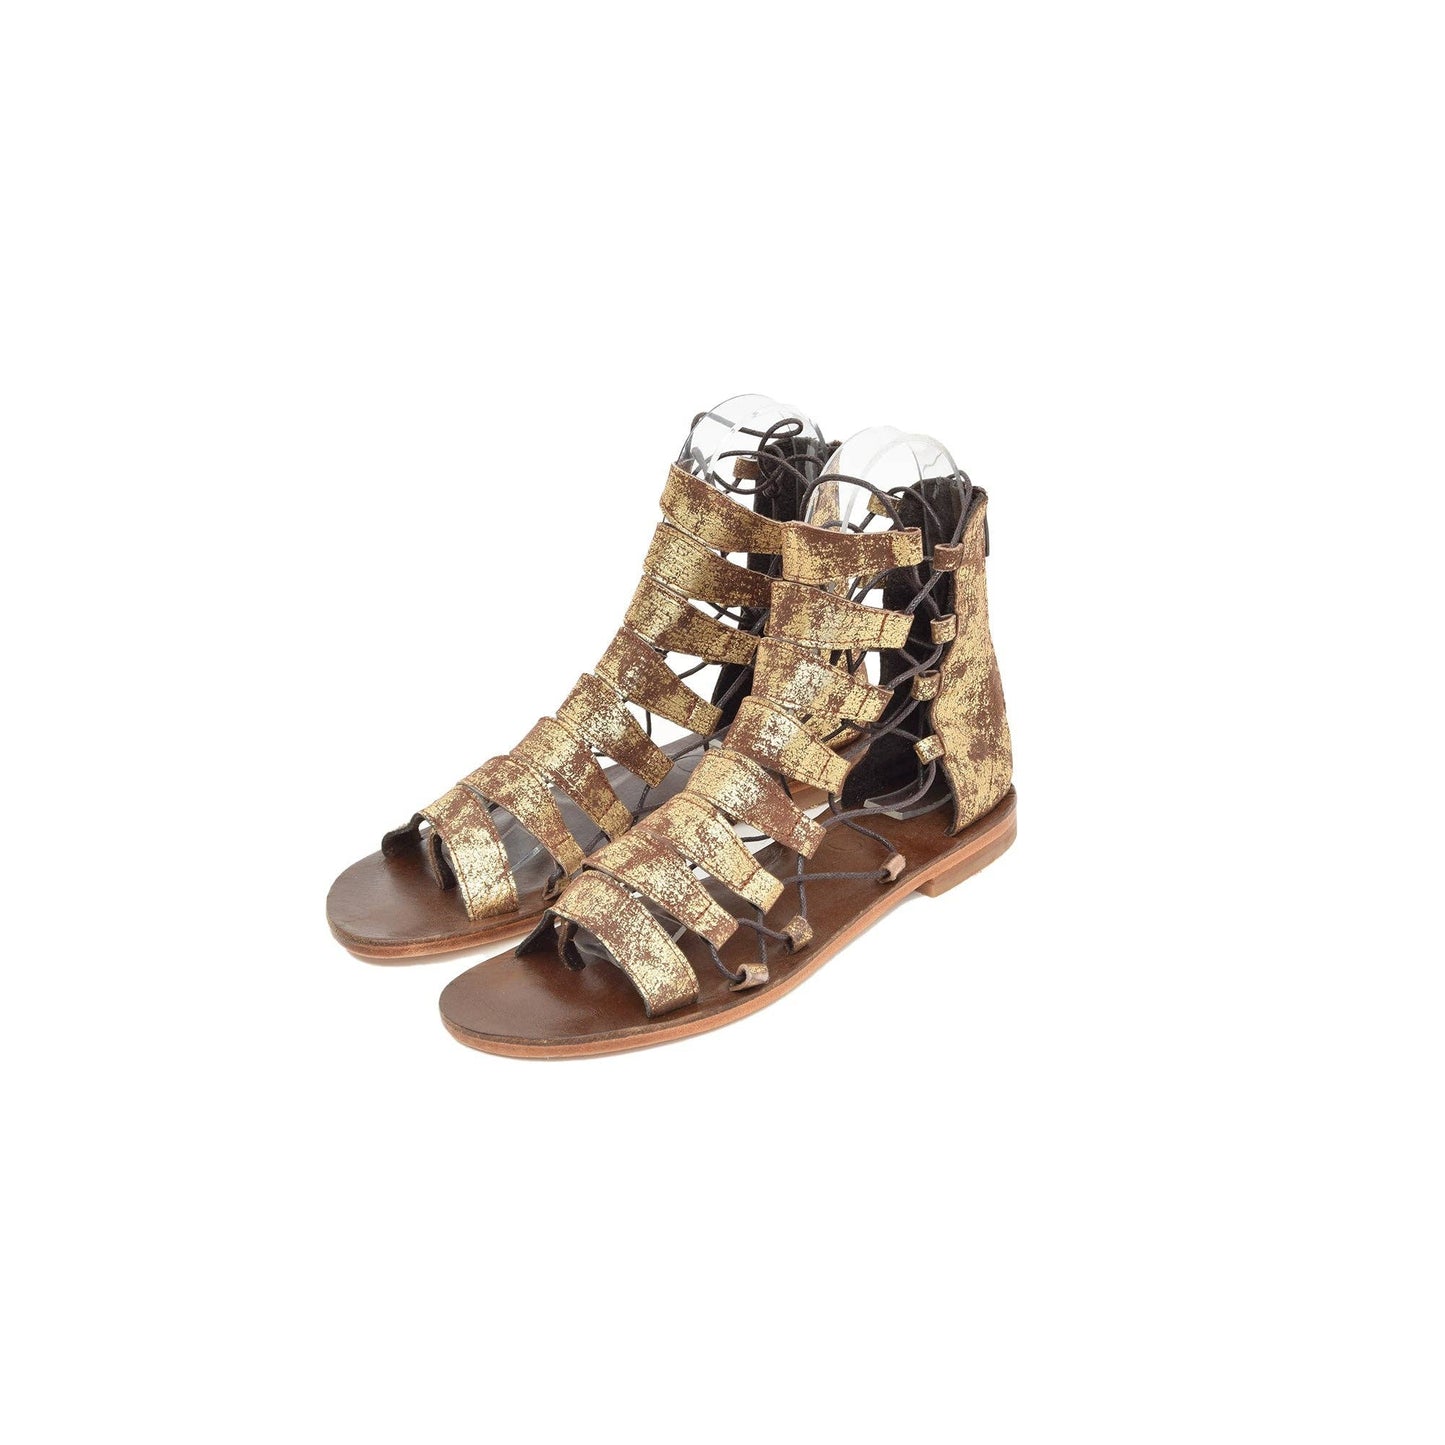 Hestia Gold Leather Sandals